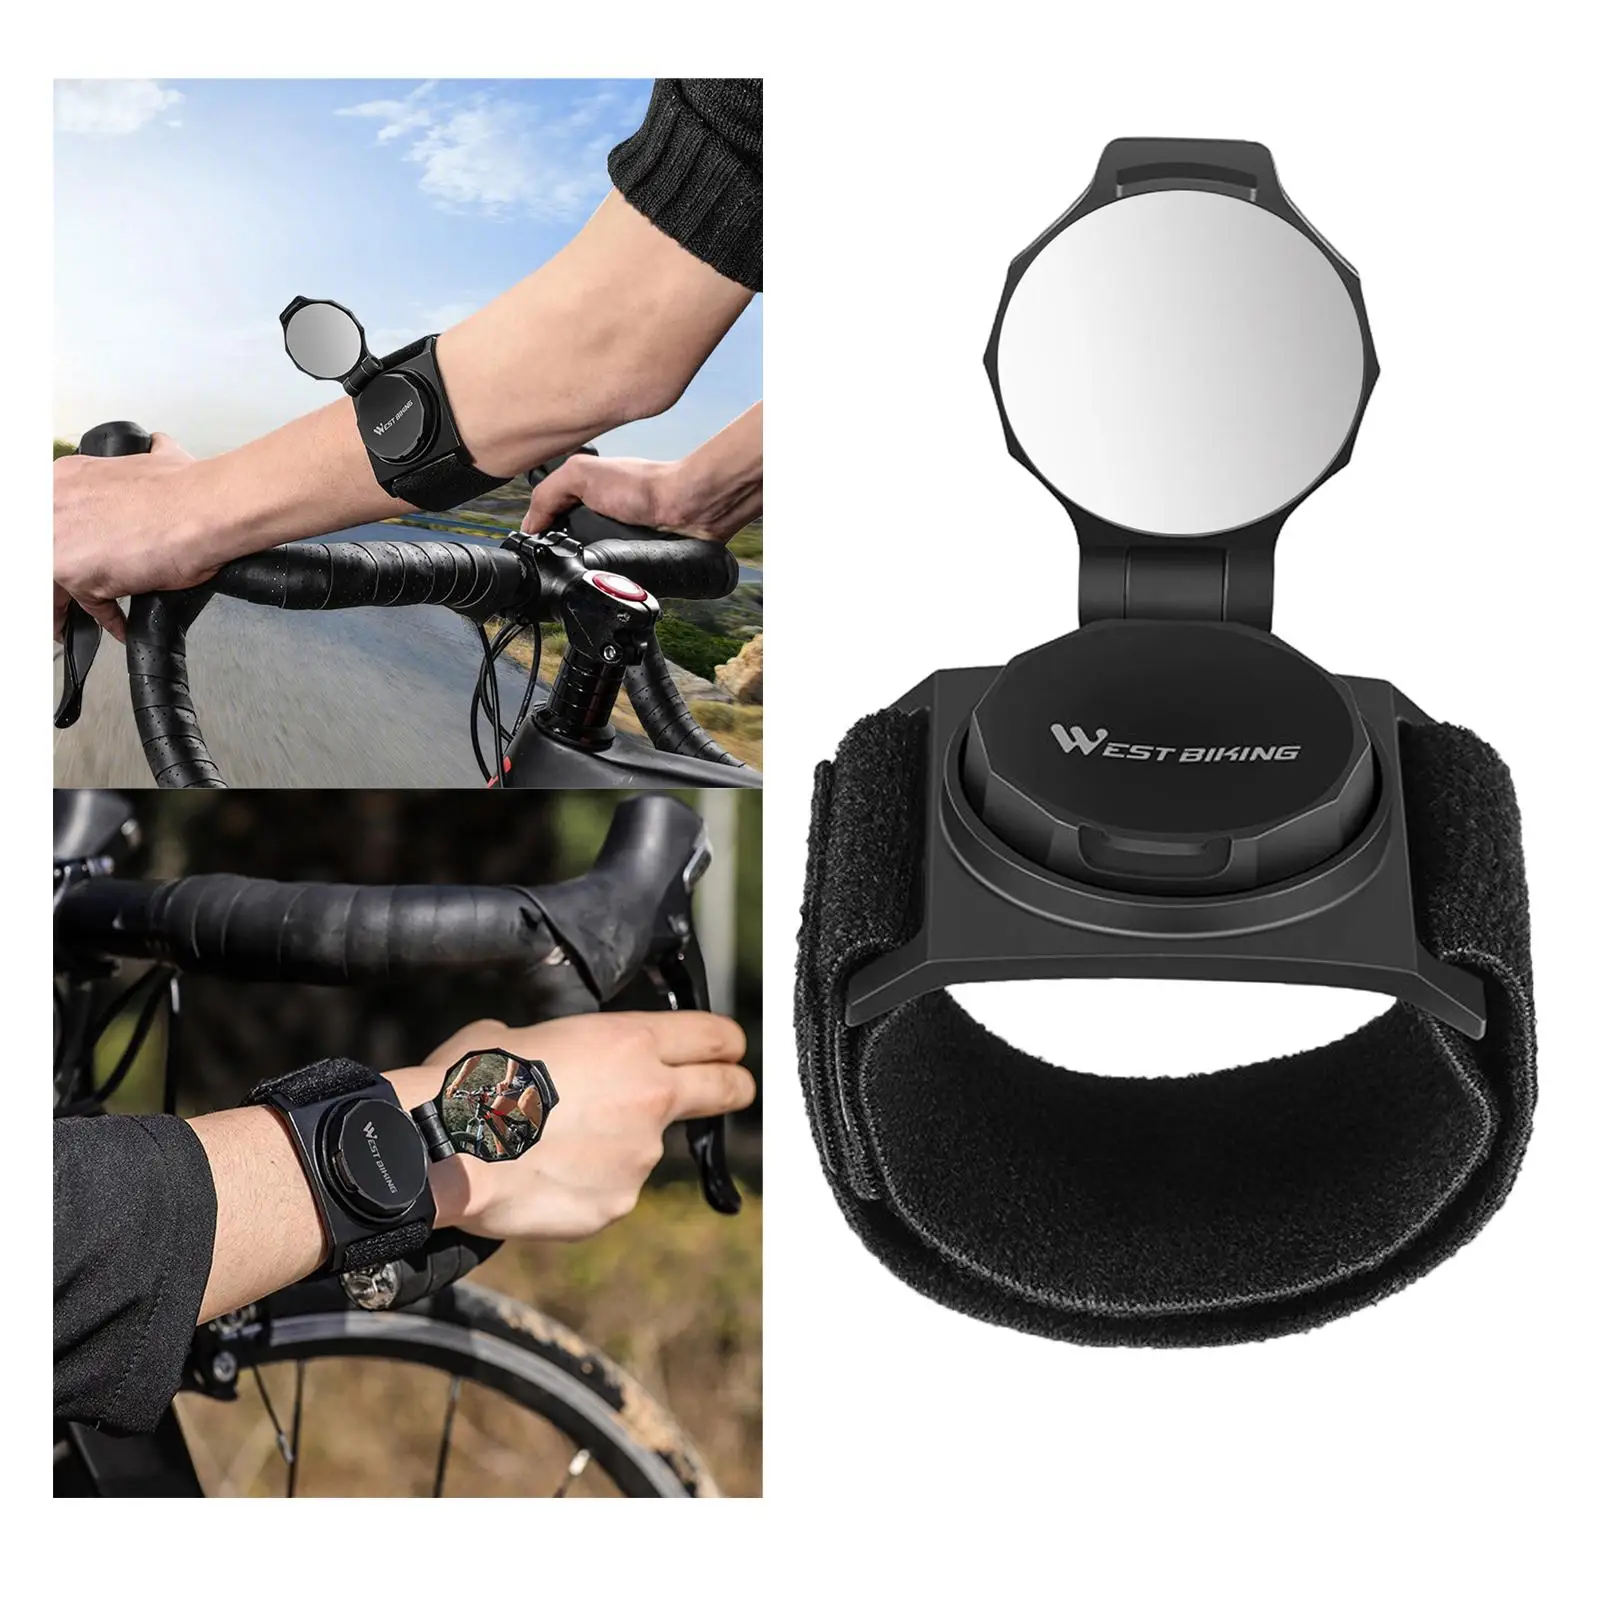 Bicycle Rear Mirror Bike Wrist Band Back Mirror Rotatable Rear Reflector Safety